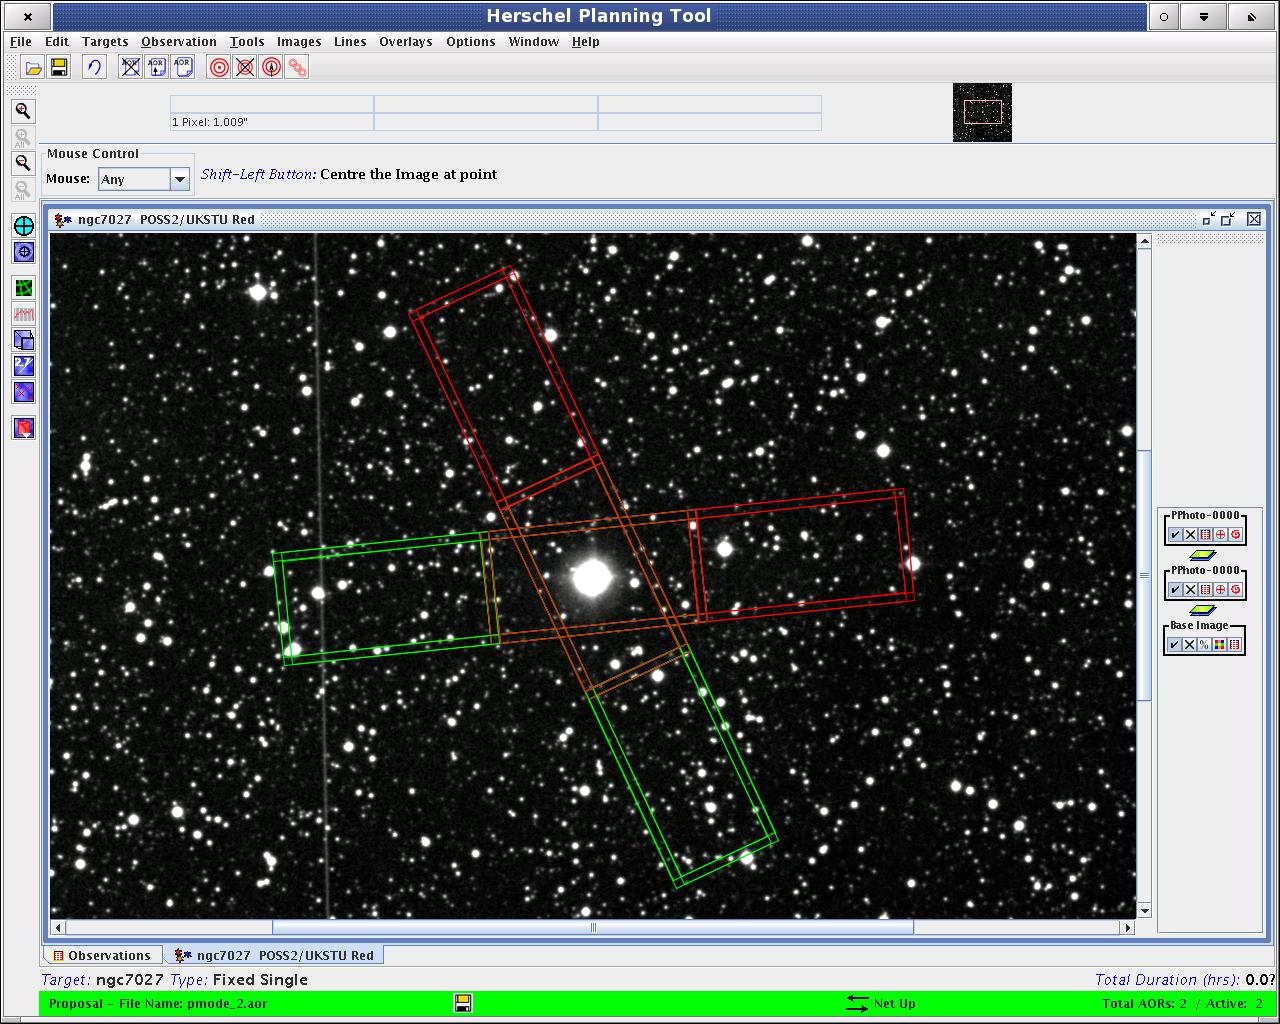 PACS "Small-source photometry" observation shown overlayed on a DSS background image of NGC7027. The choper off-positions are shown in red, the two footprints correspond the borders of the object visibility window respectively.